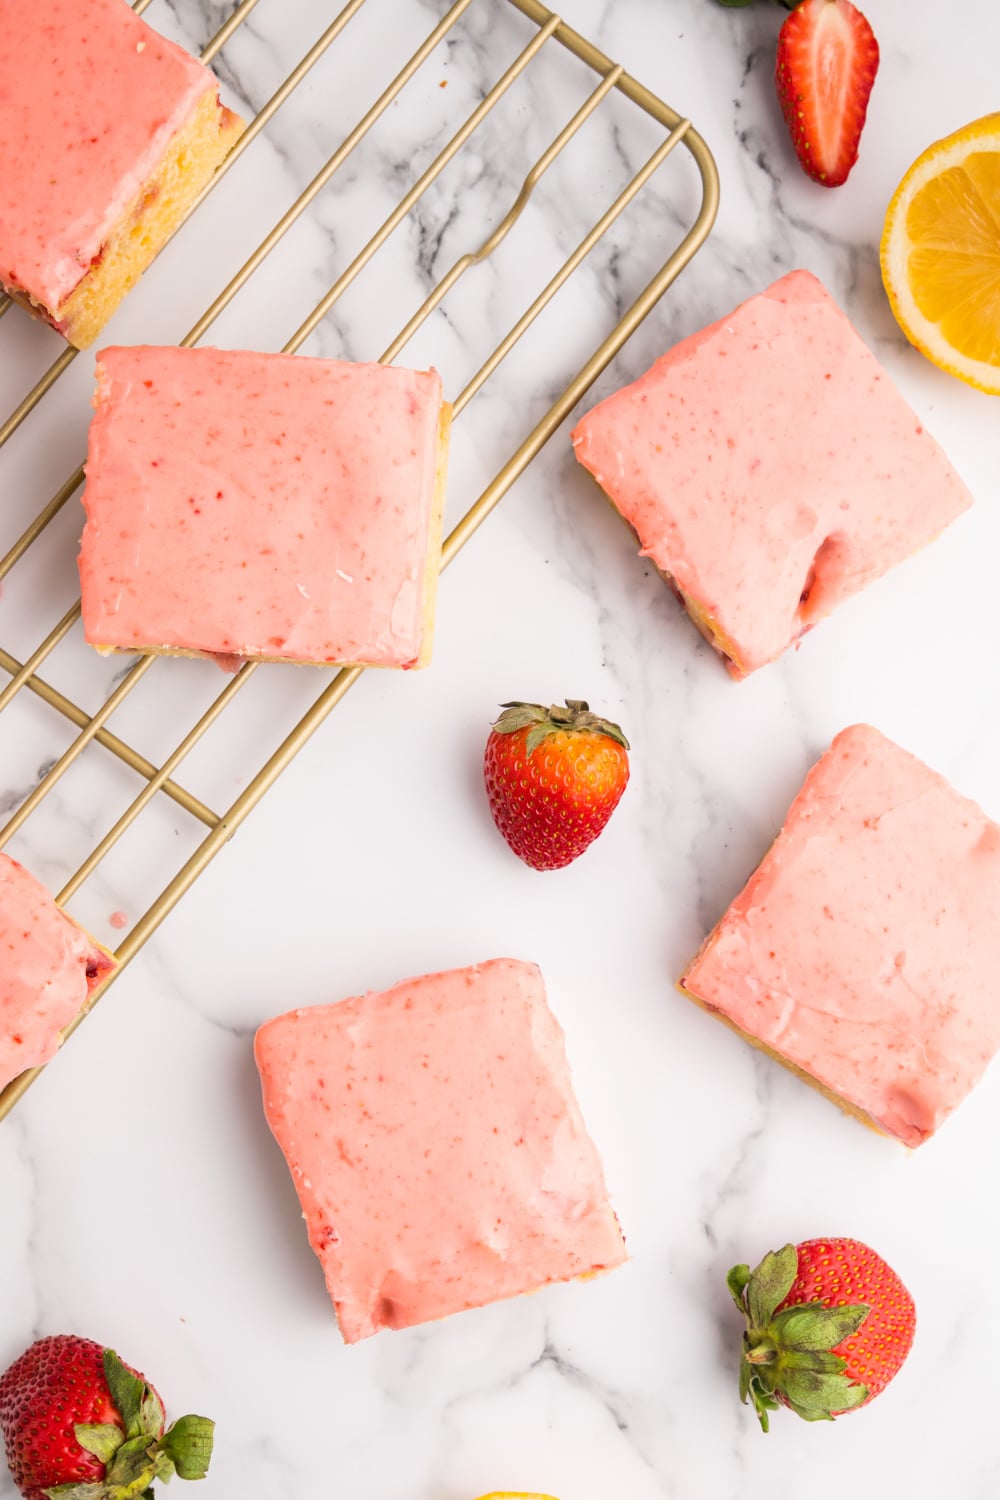 Strawberry Blondies with frosting on a cooling rack resting on a white marble countertop.